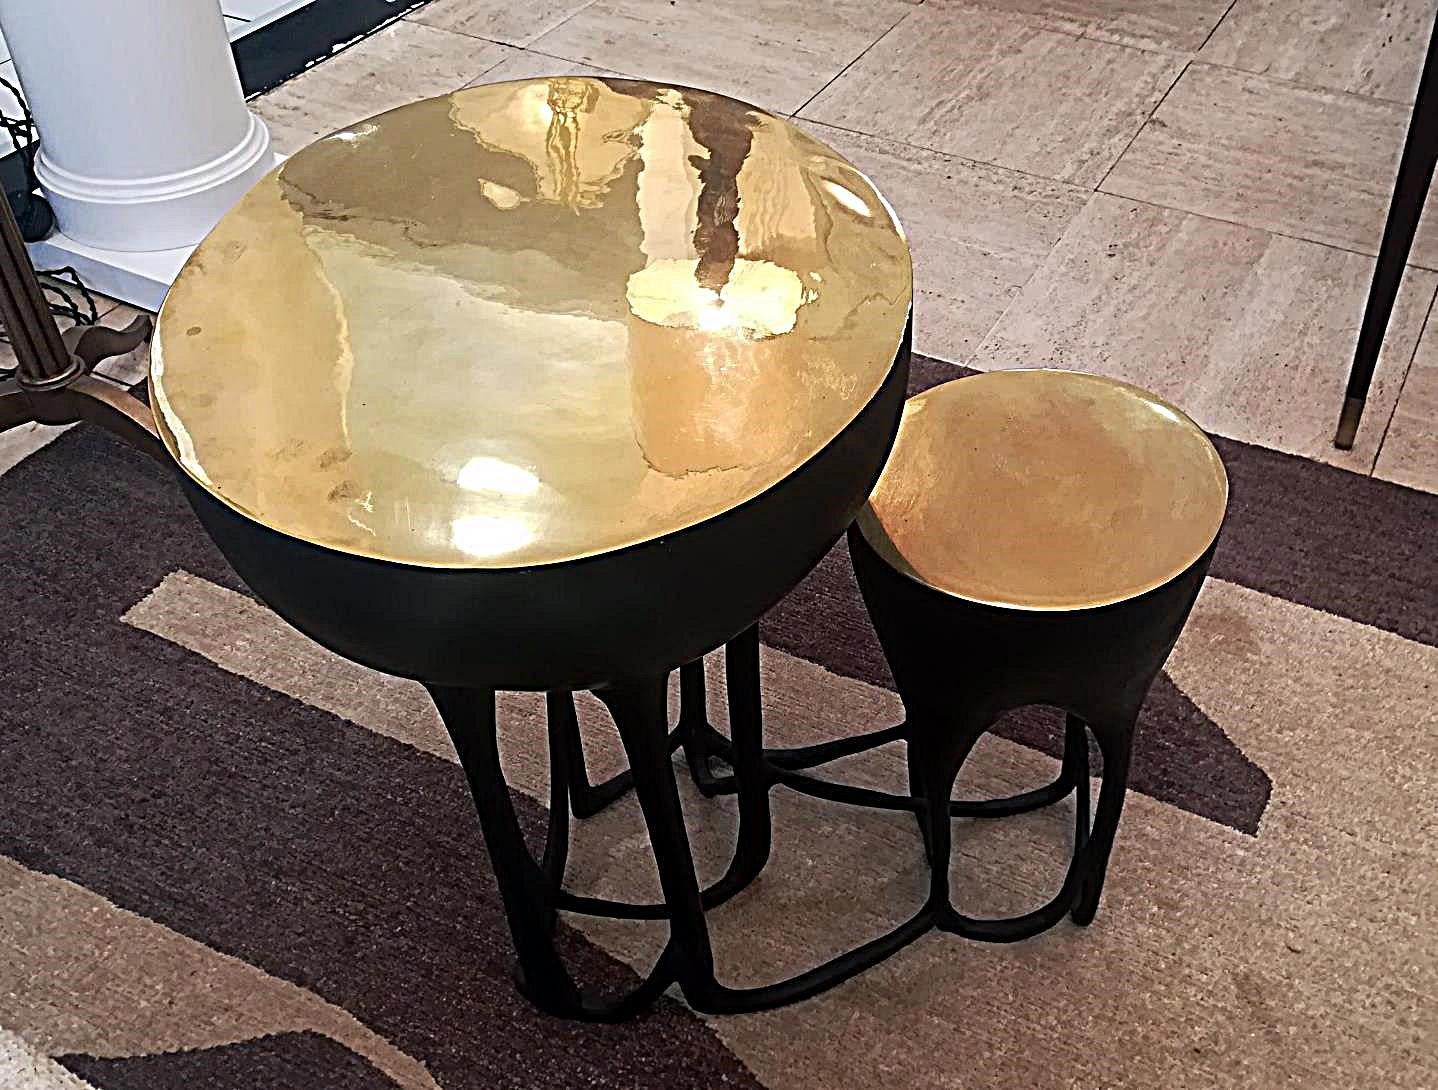 Double top bronze side table, black patina except the top natural bronze.
 